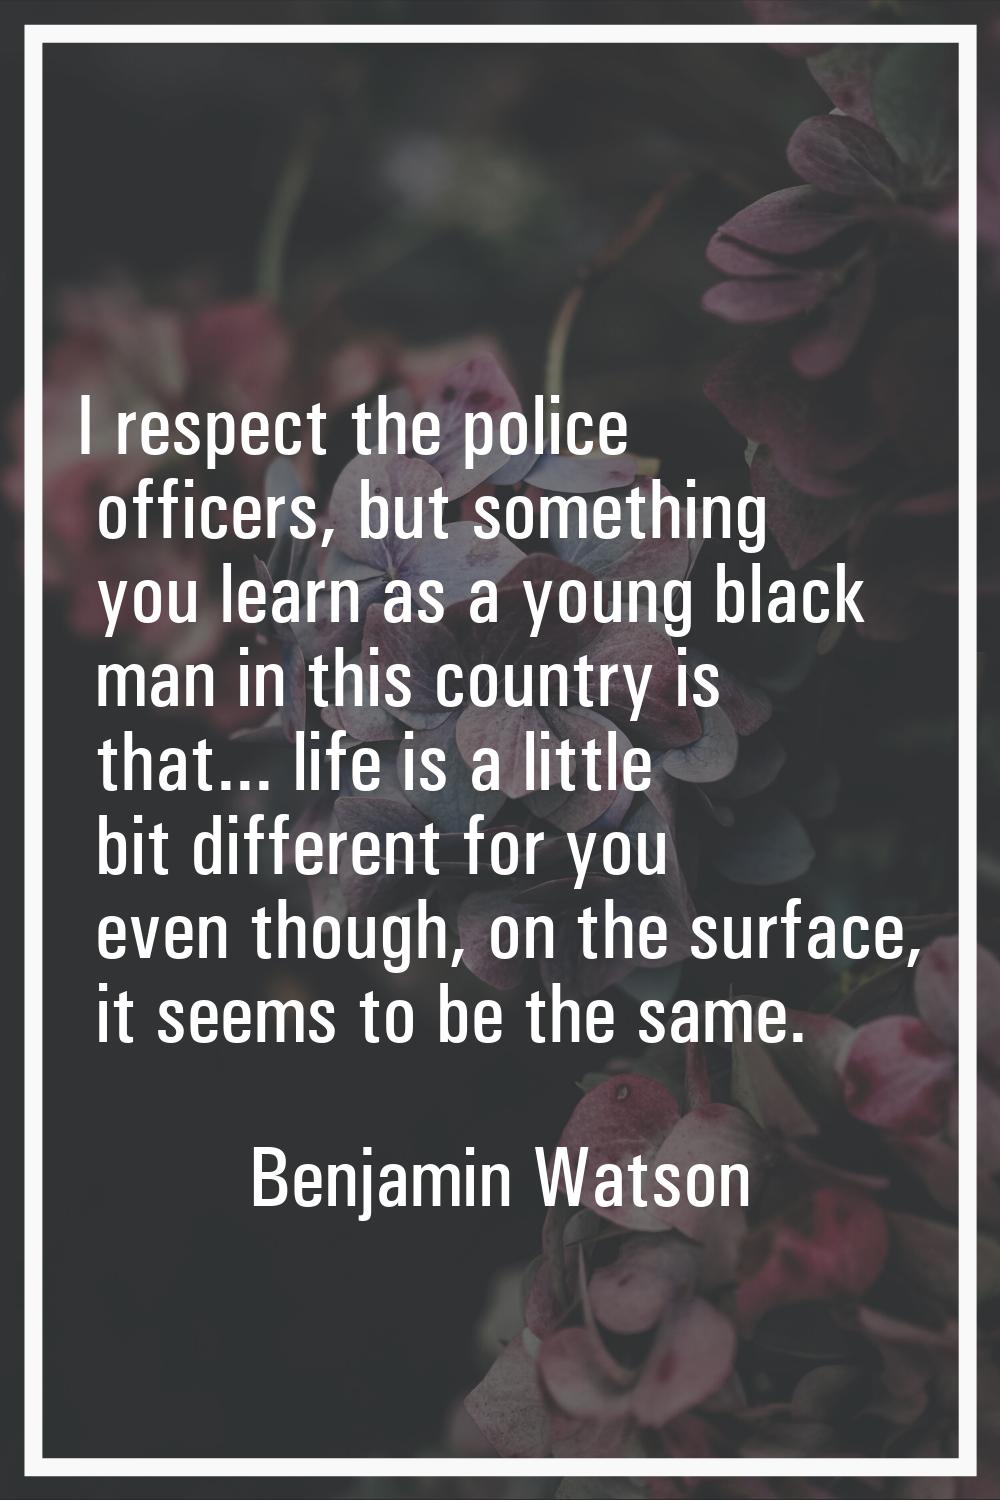 I respect the police officers, but something you learn as a young black man in this country is that